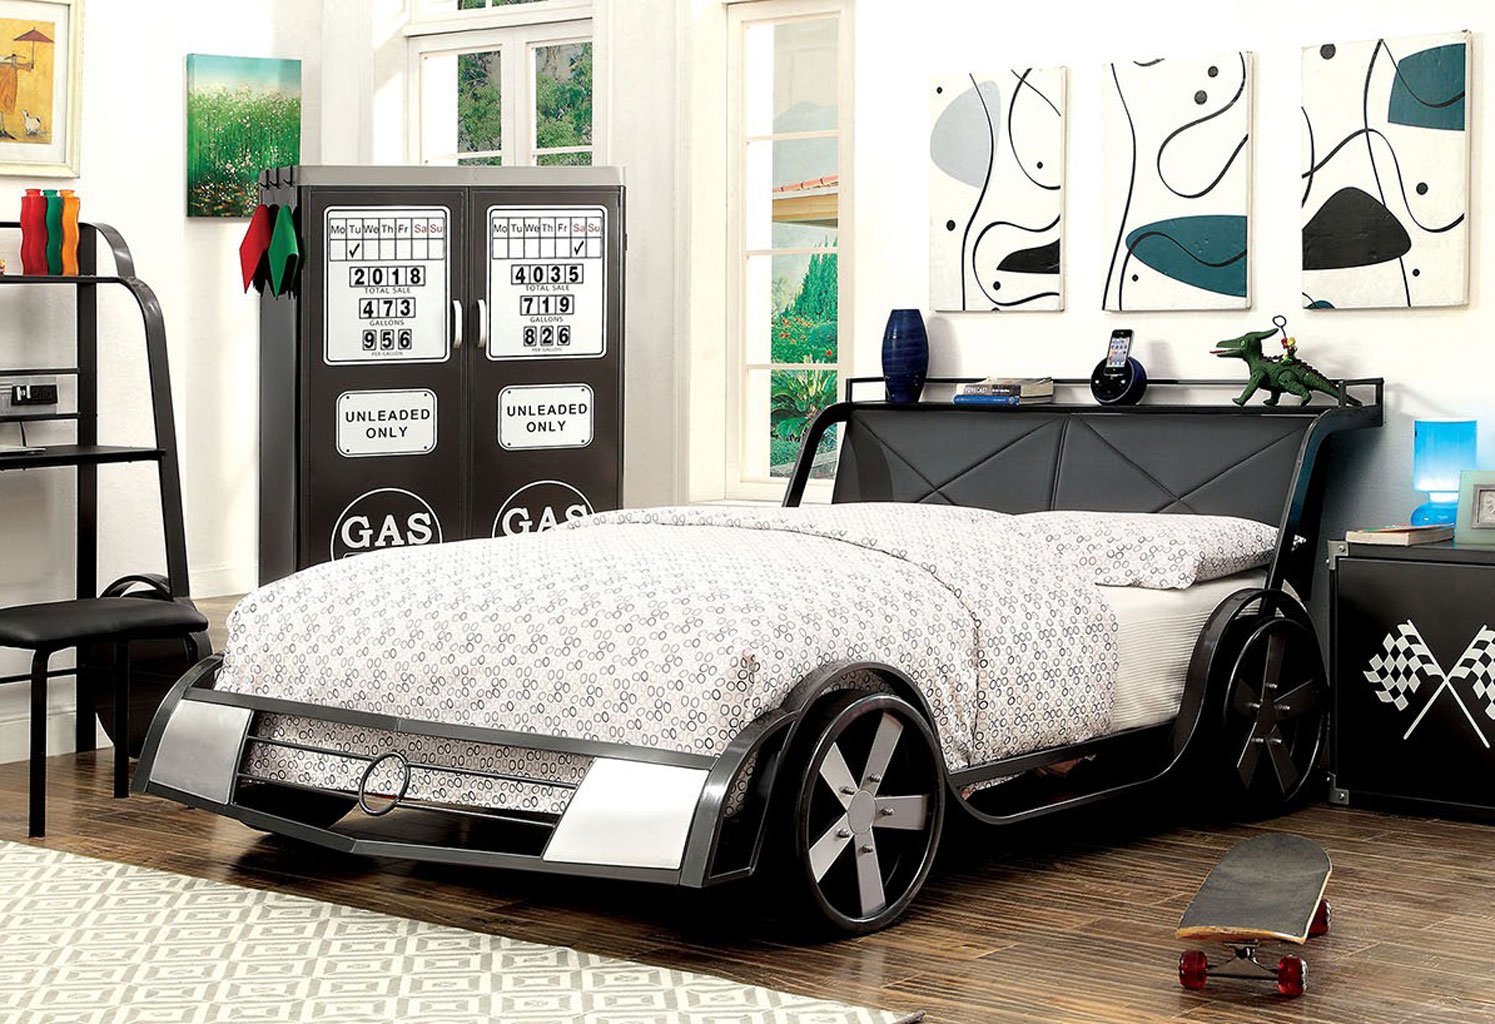 youth car bed